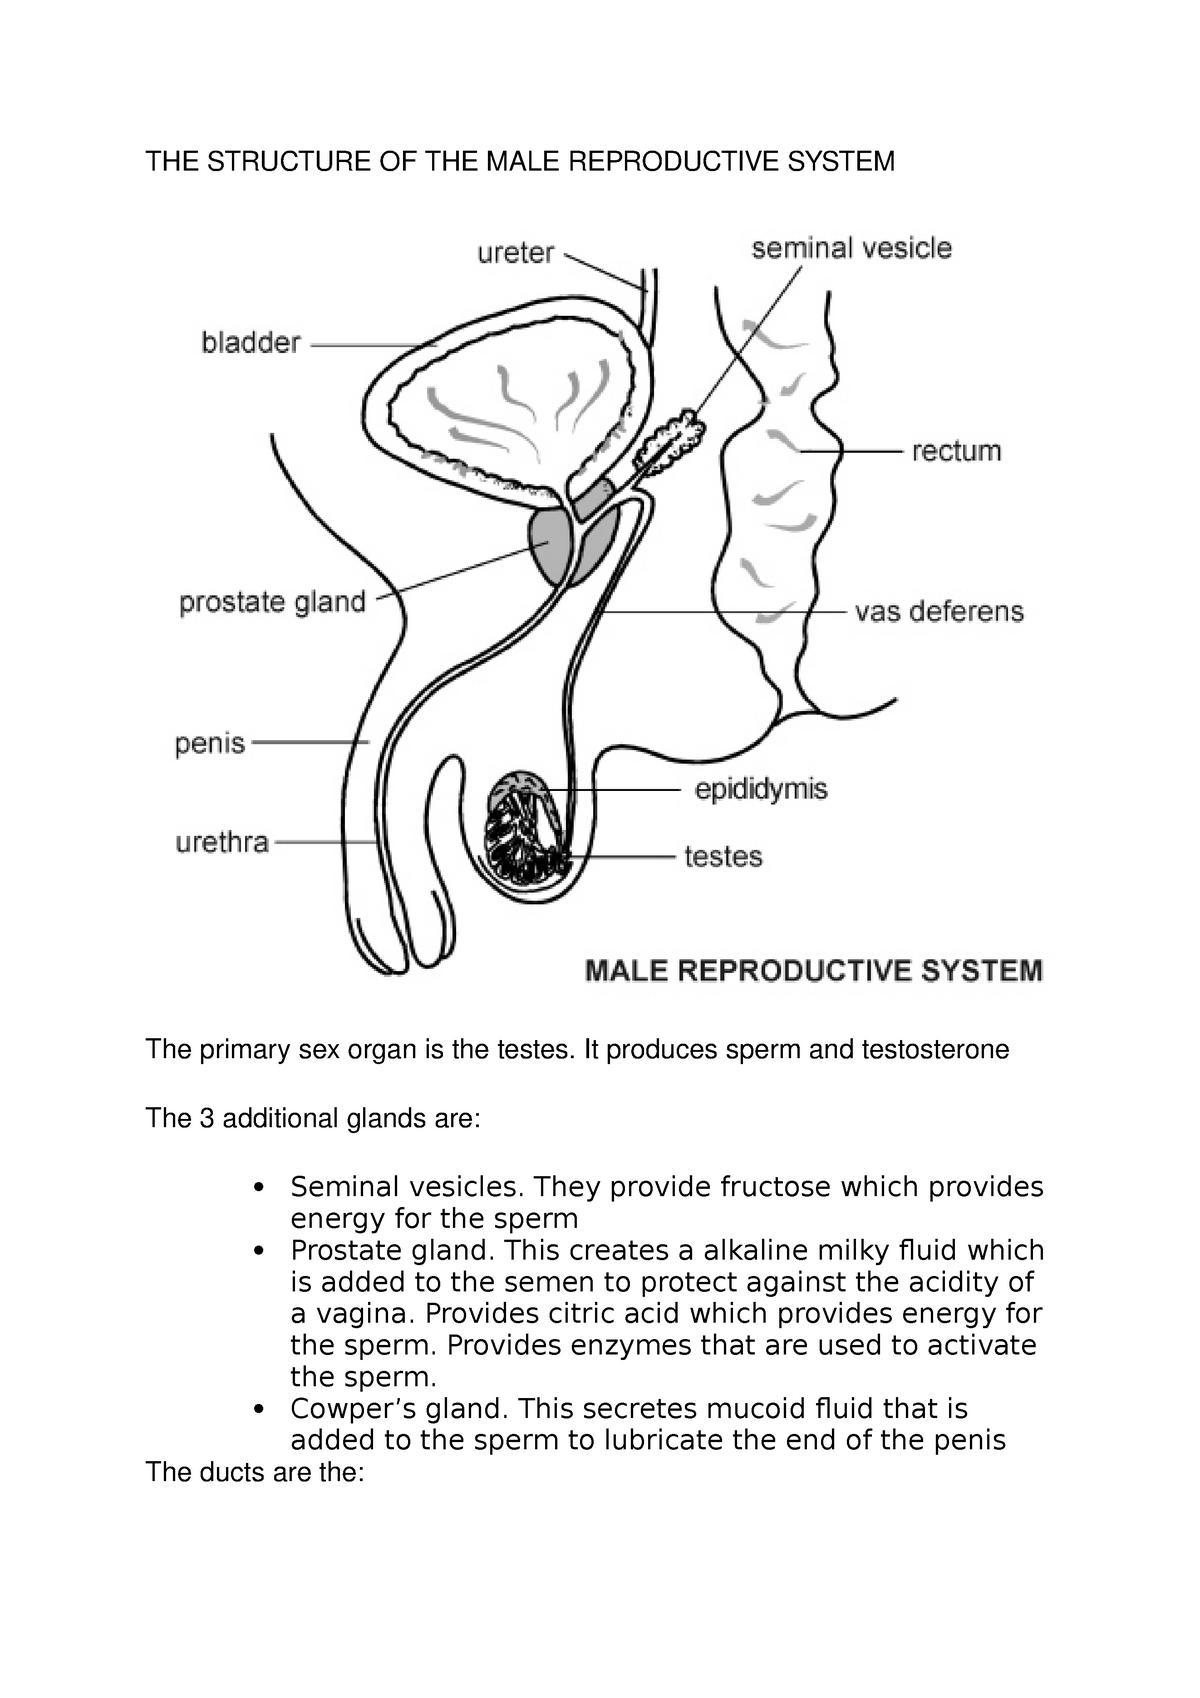 Grade 12 Ieb Life Sciences Notes Reproductive Systems The Structure Of The Male Reproductive 5308